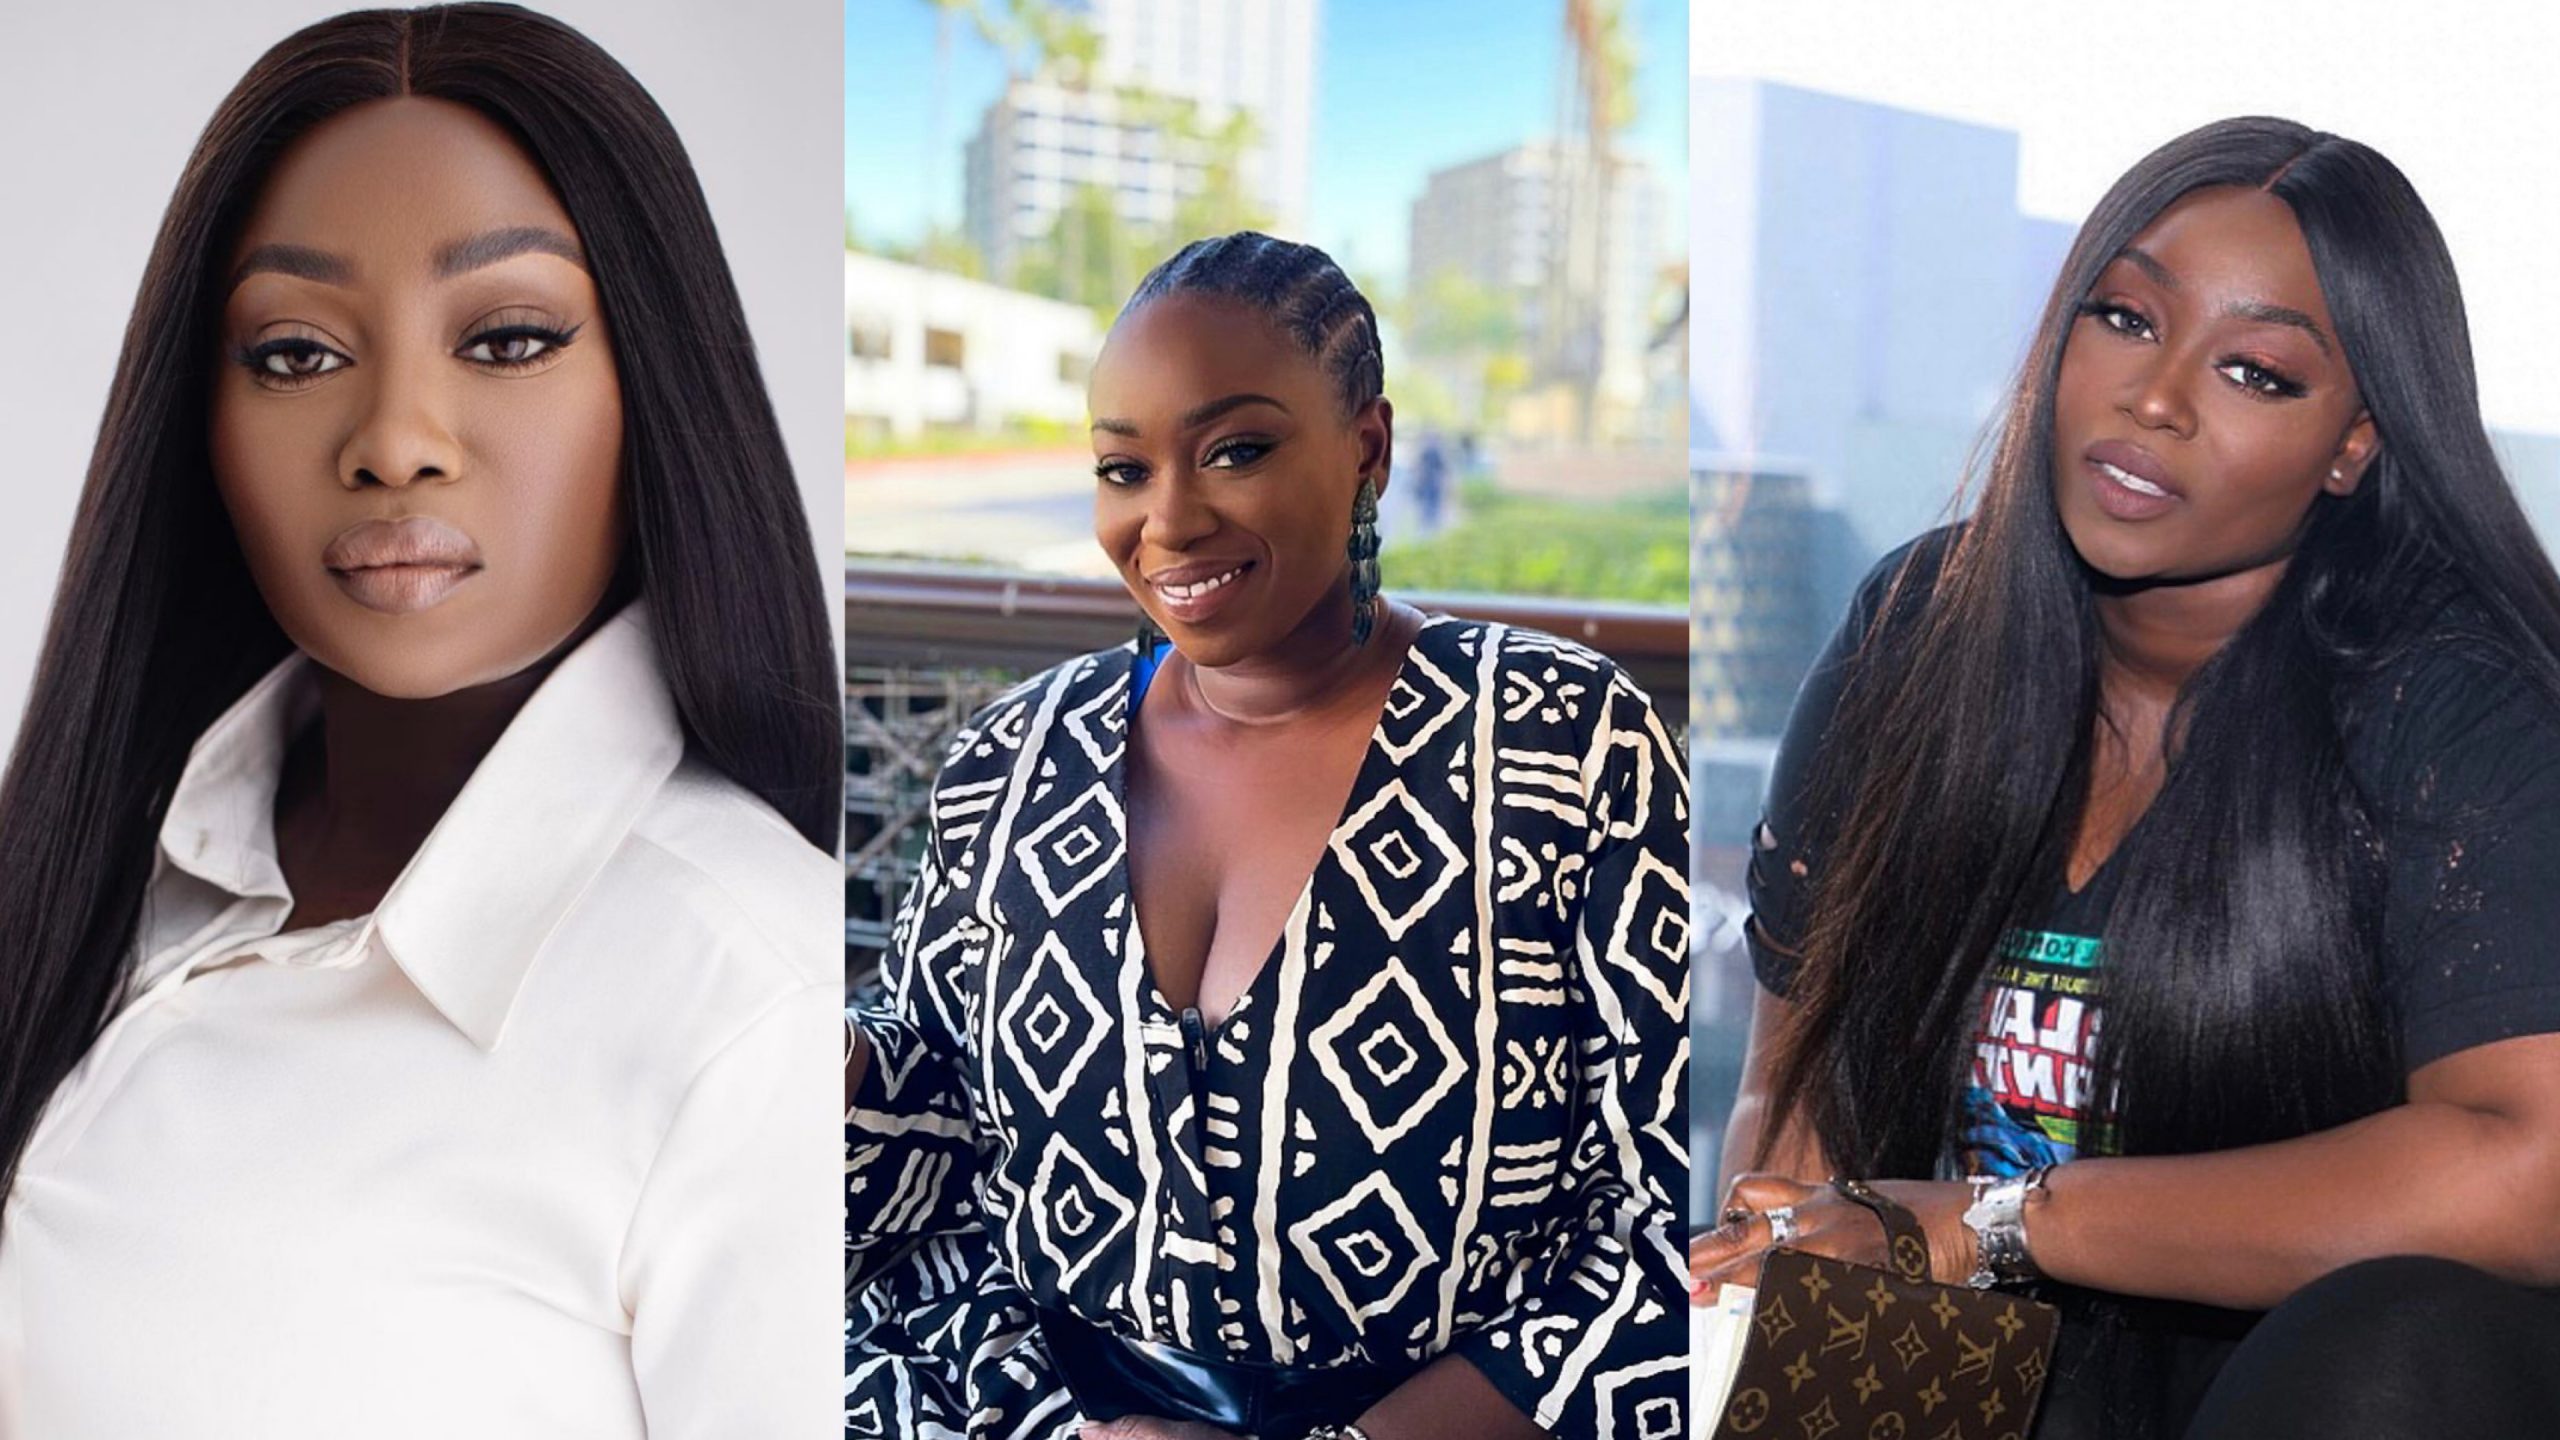 “It’s Cool To Be African Now” – Peace Hyde Shares in New Interview with the BBC